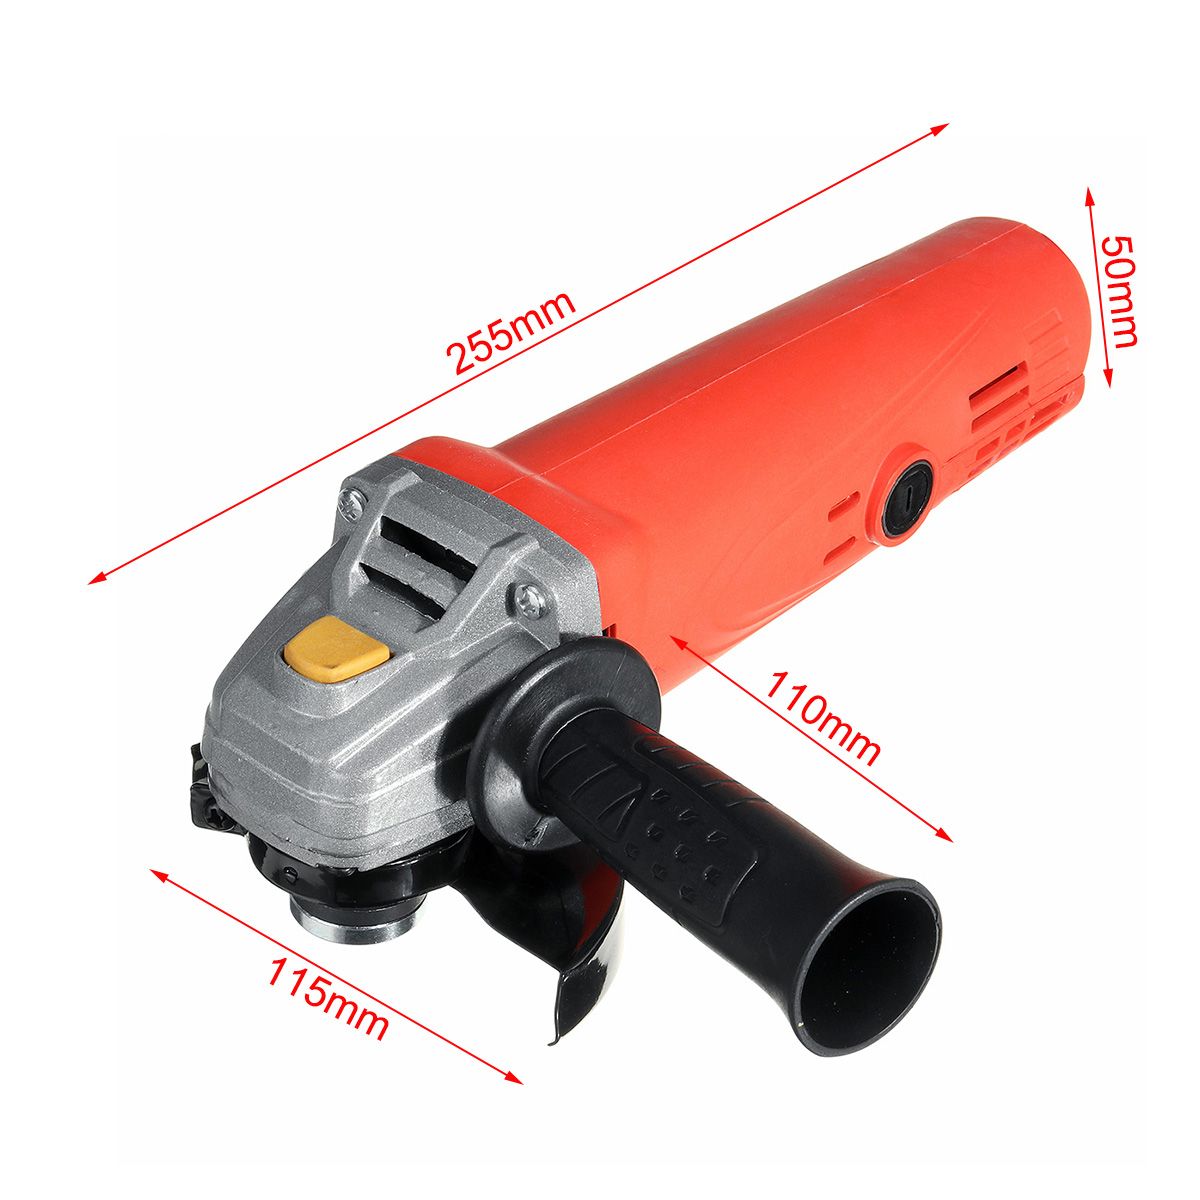 220V-Multifunctional-Power-Angle-Grinder-100mm-Grinding-Cutting-Polishing-Machine-Tool-Electric-Angl-1616157